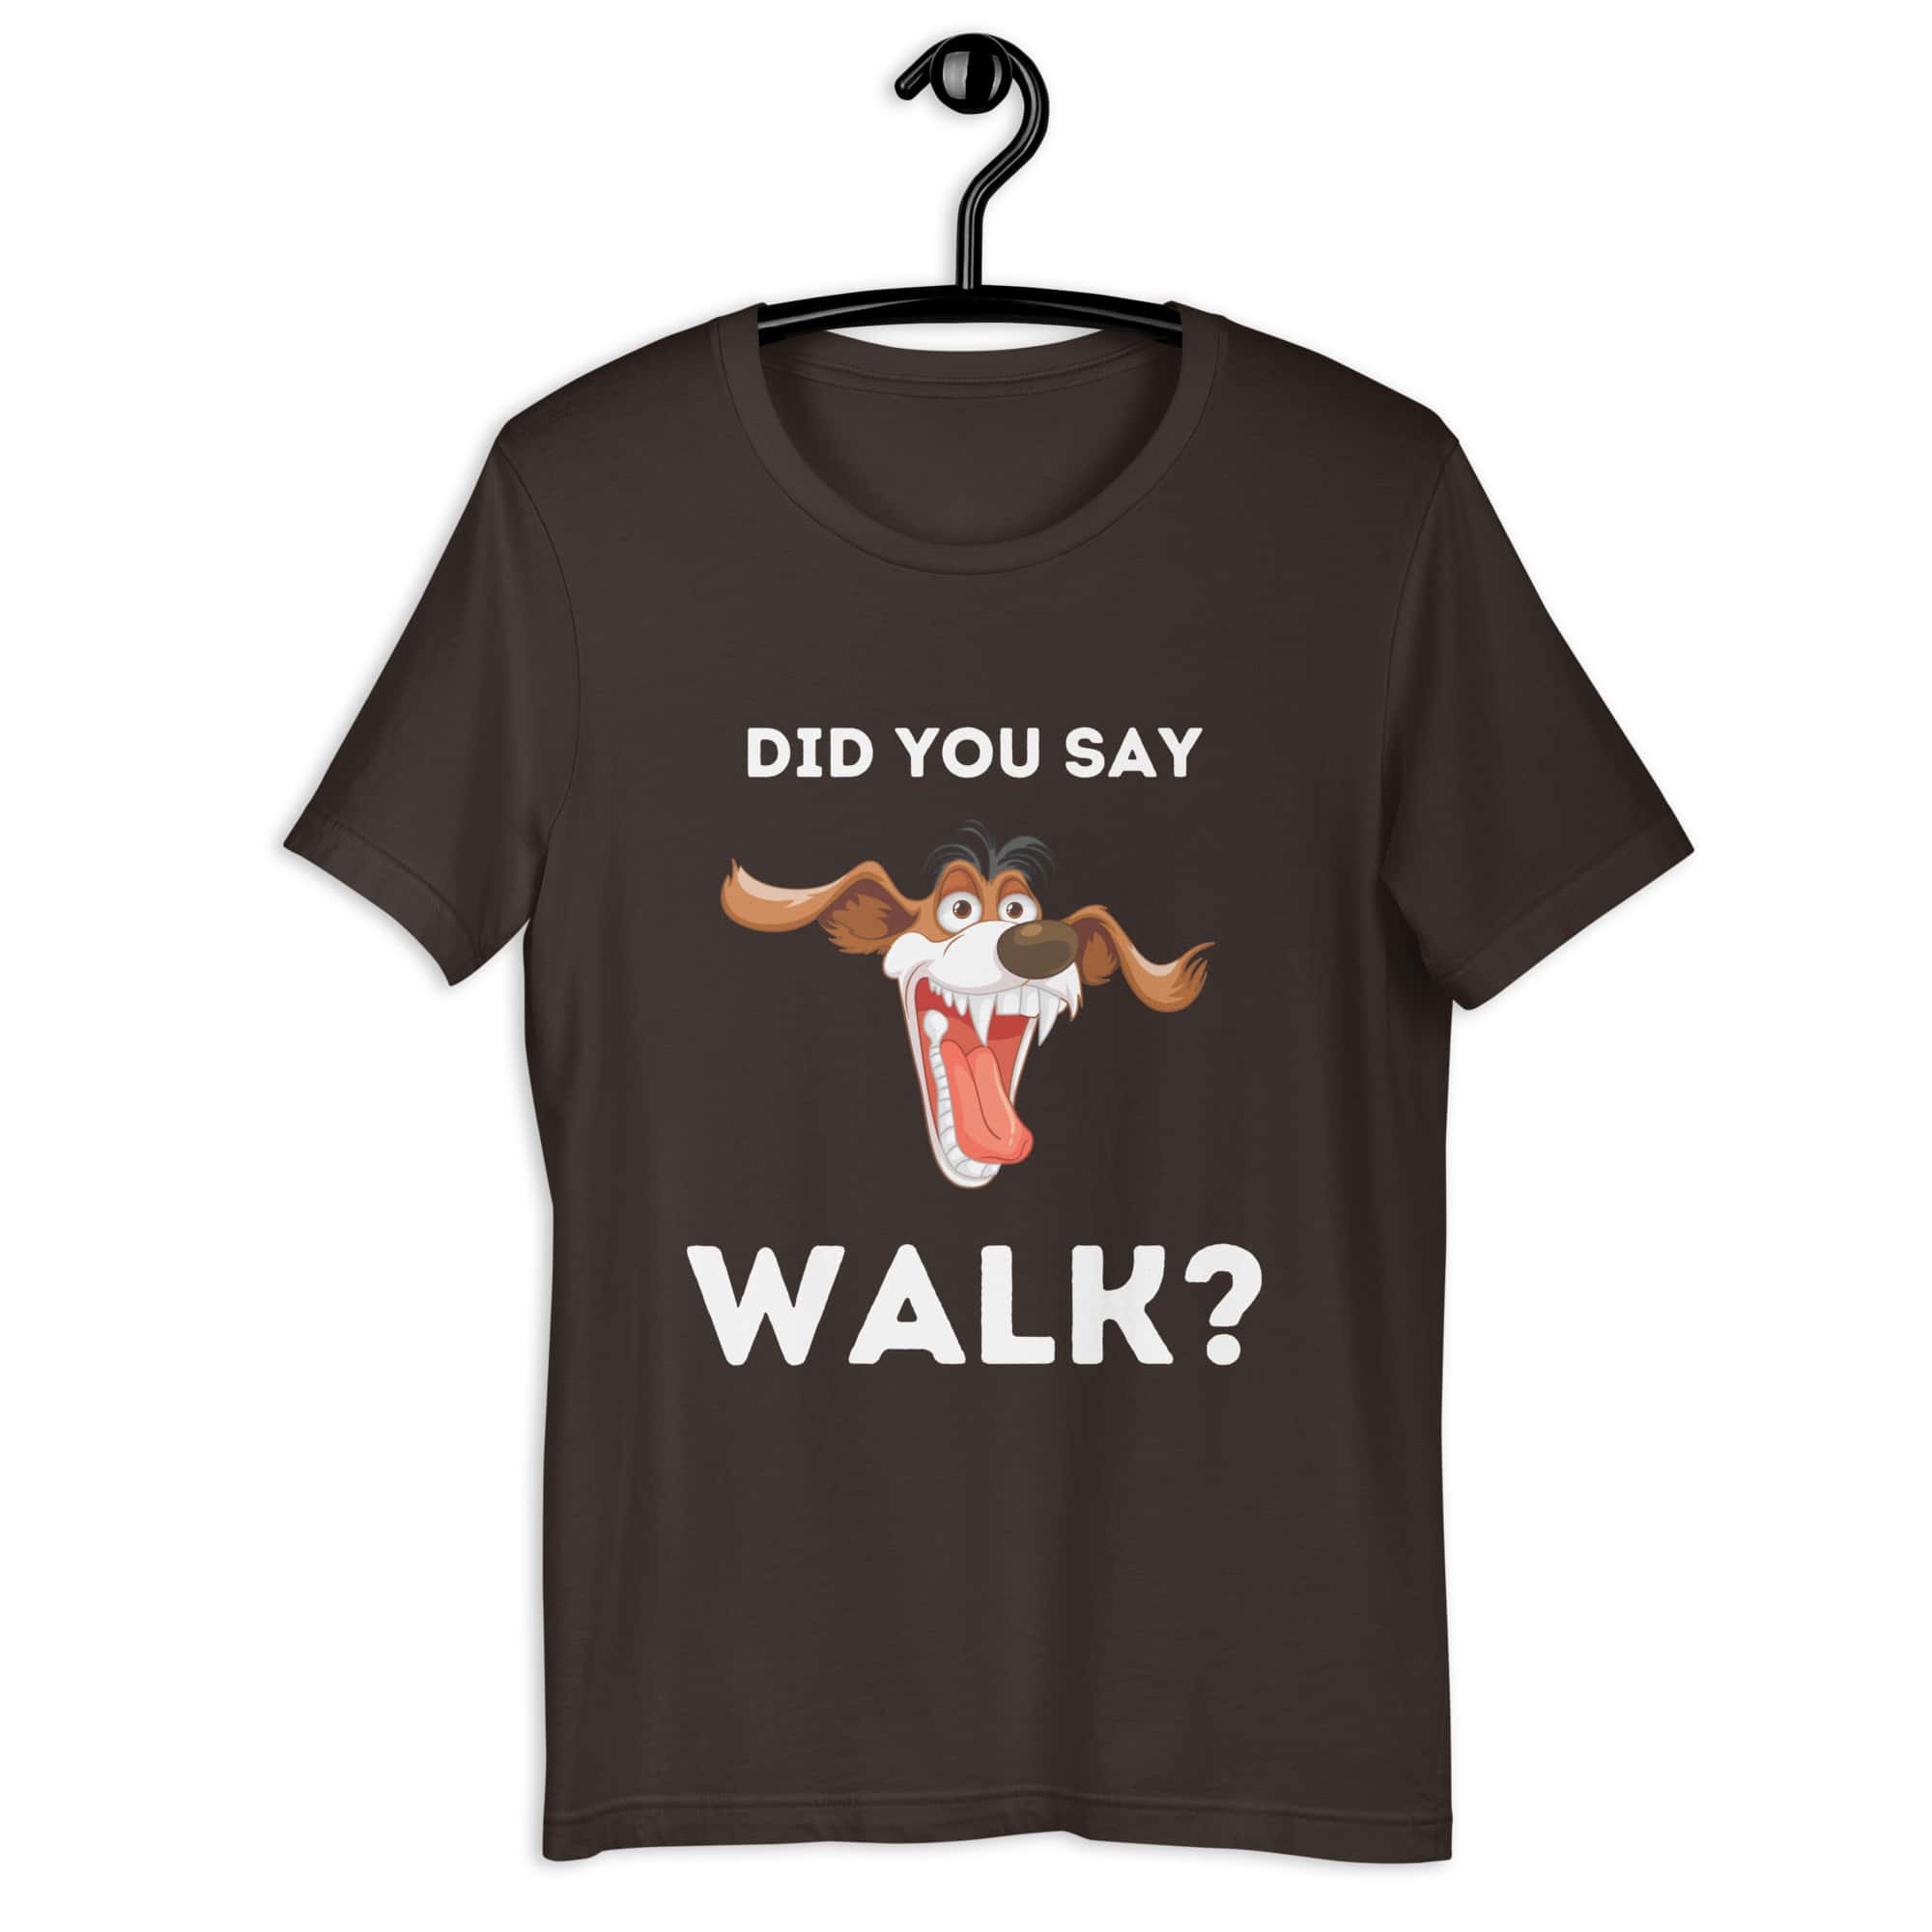 The "Funny 'Did You Say Walk?' Dog Unisex T-Shirt" captures the excitement dogs feel at the mention of a walk. Made from a comfortable, durable blend, it features a vibrant graphic that dog lovers will relate to. Available in various sizes and colors, it's perfect for casual wear, highlighting a universal moment in dog ownership with humor and style. Brown